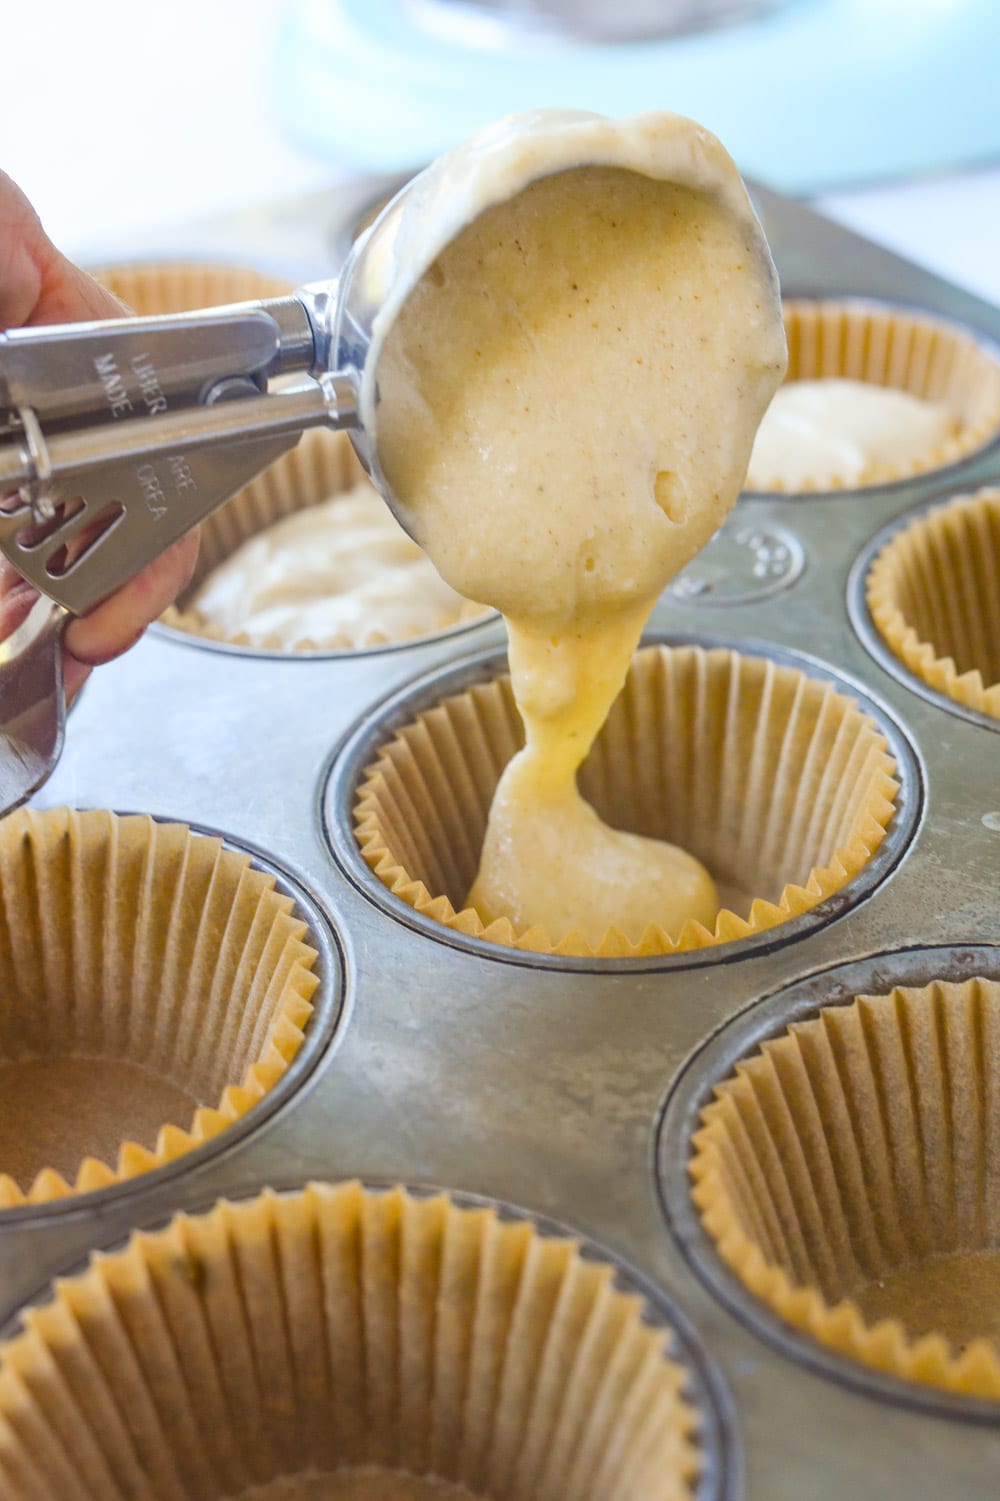 Filling cupcake liners with batter